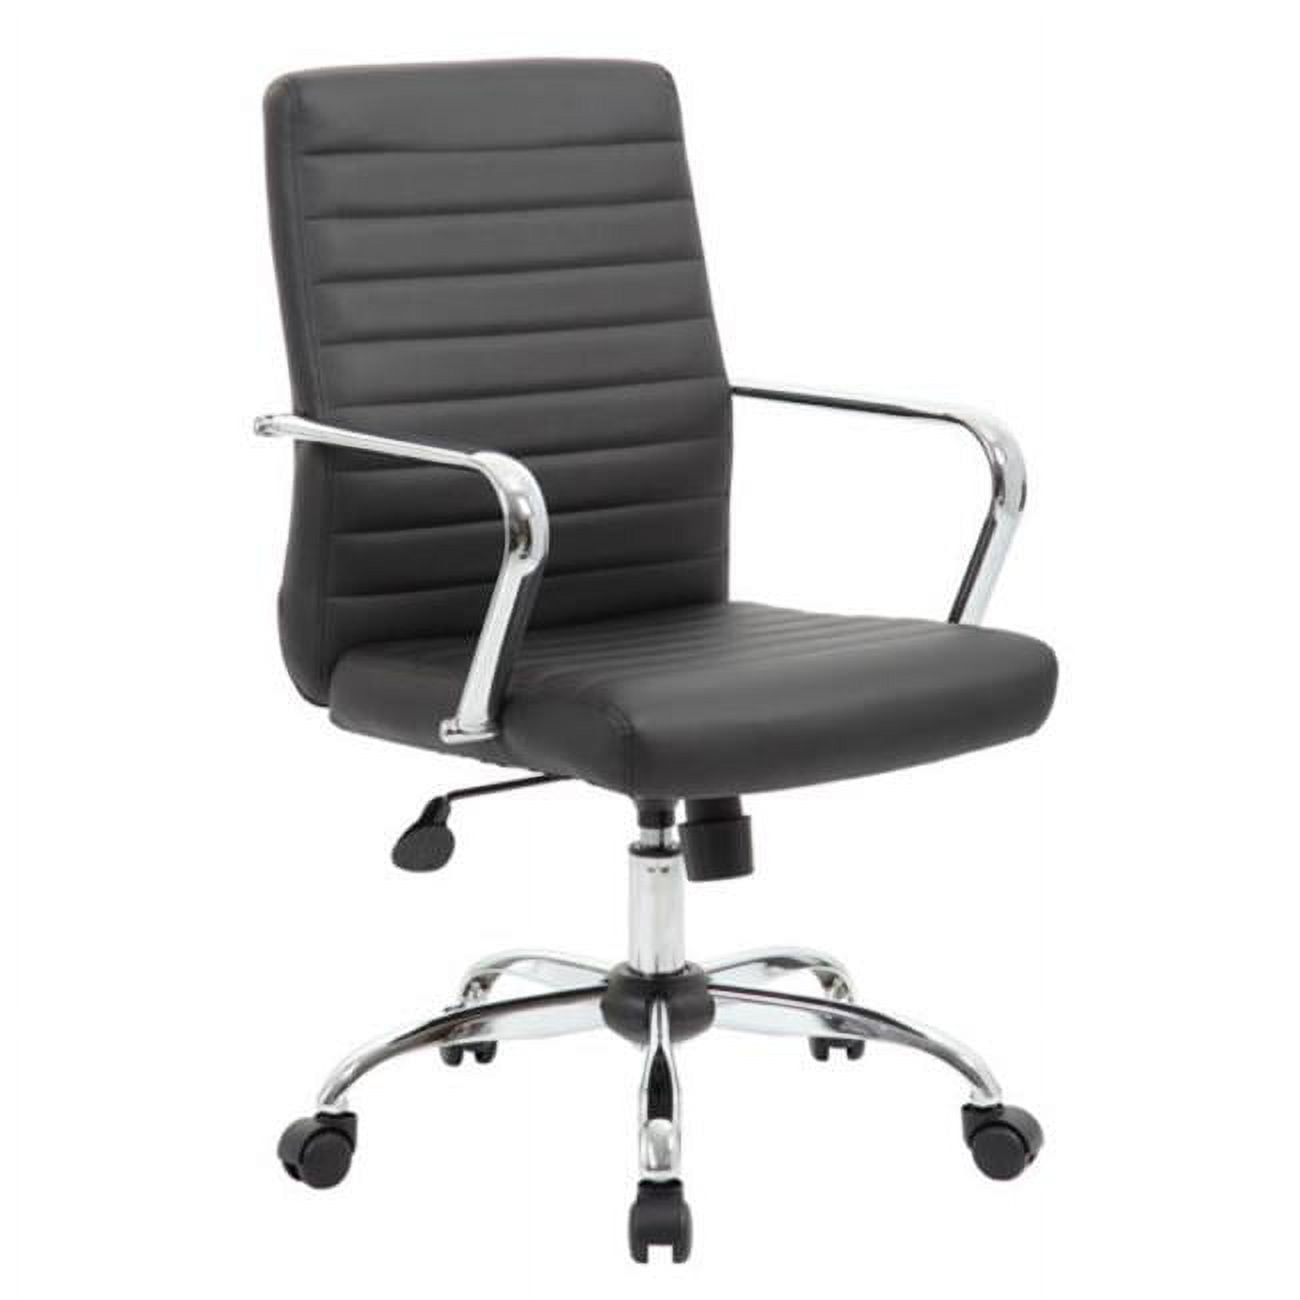 B436c-cp Boss Retro Task Chair With Chrome Fixed Arms, Black